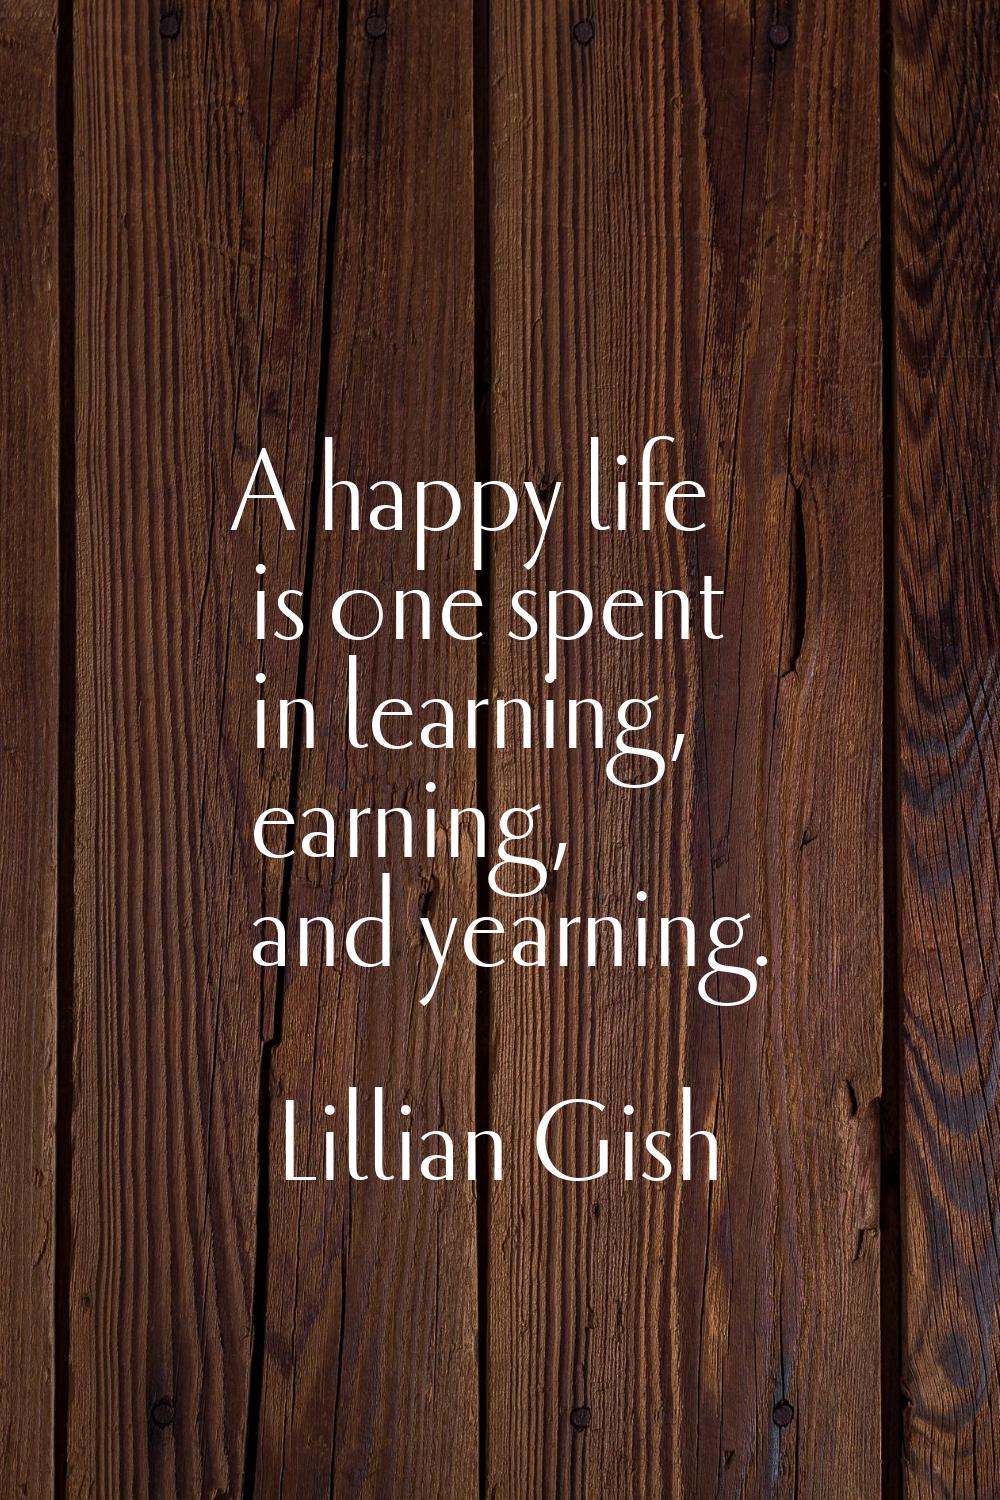 A happy life is one spent in learning, earning, and yearning.